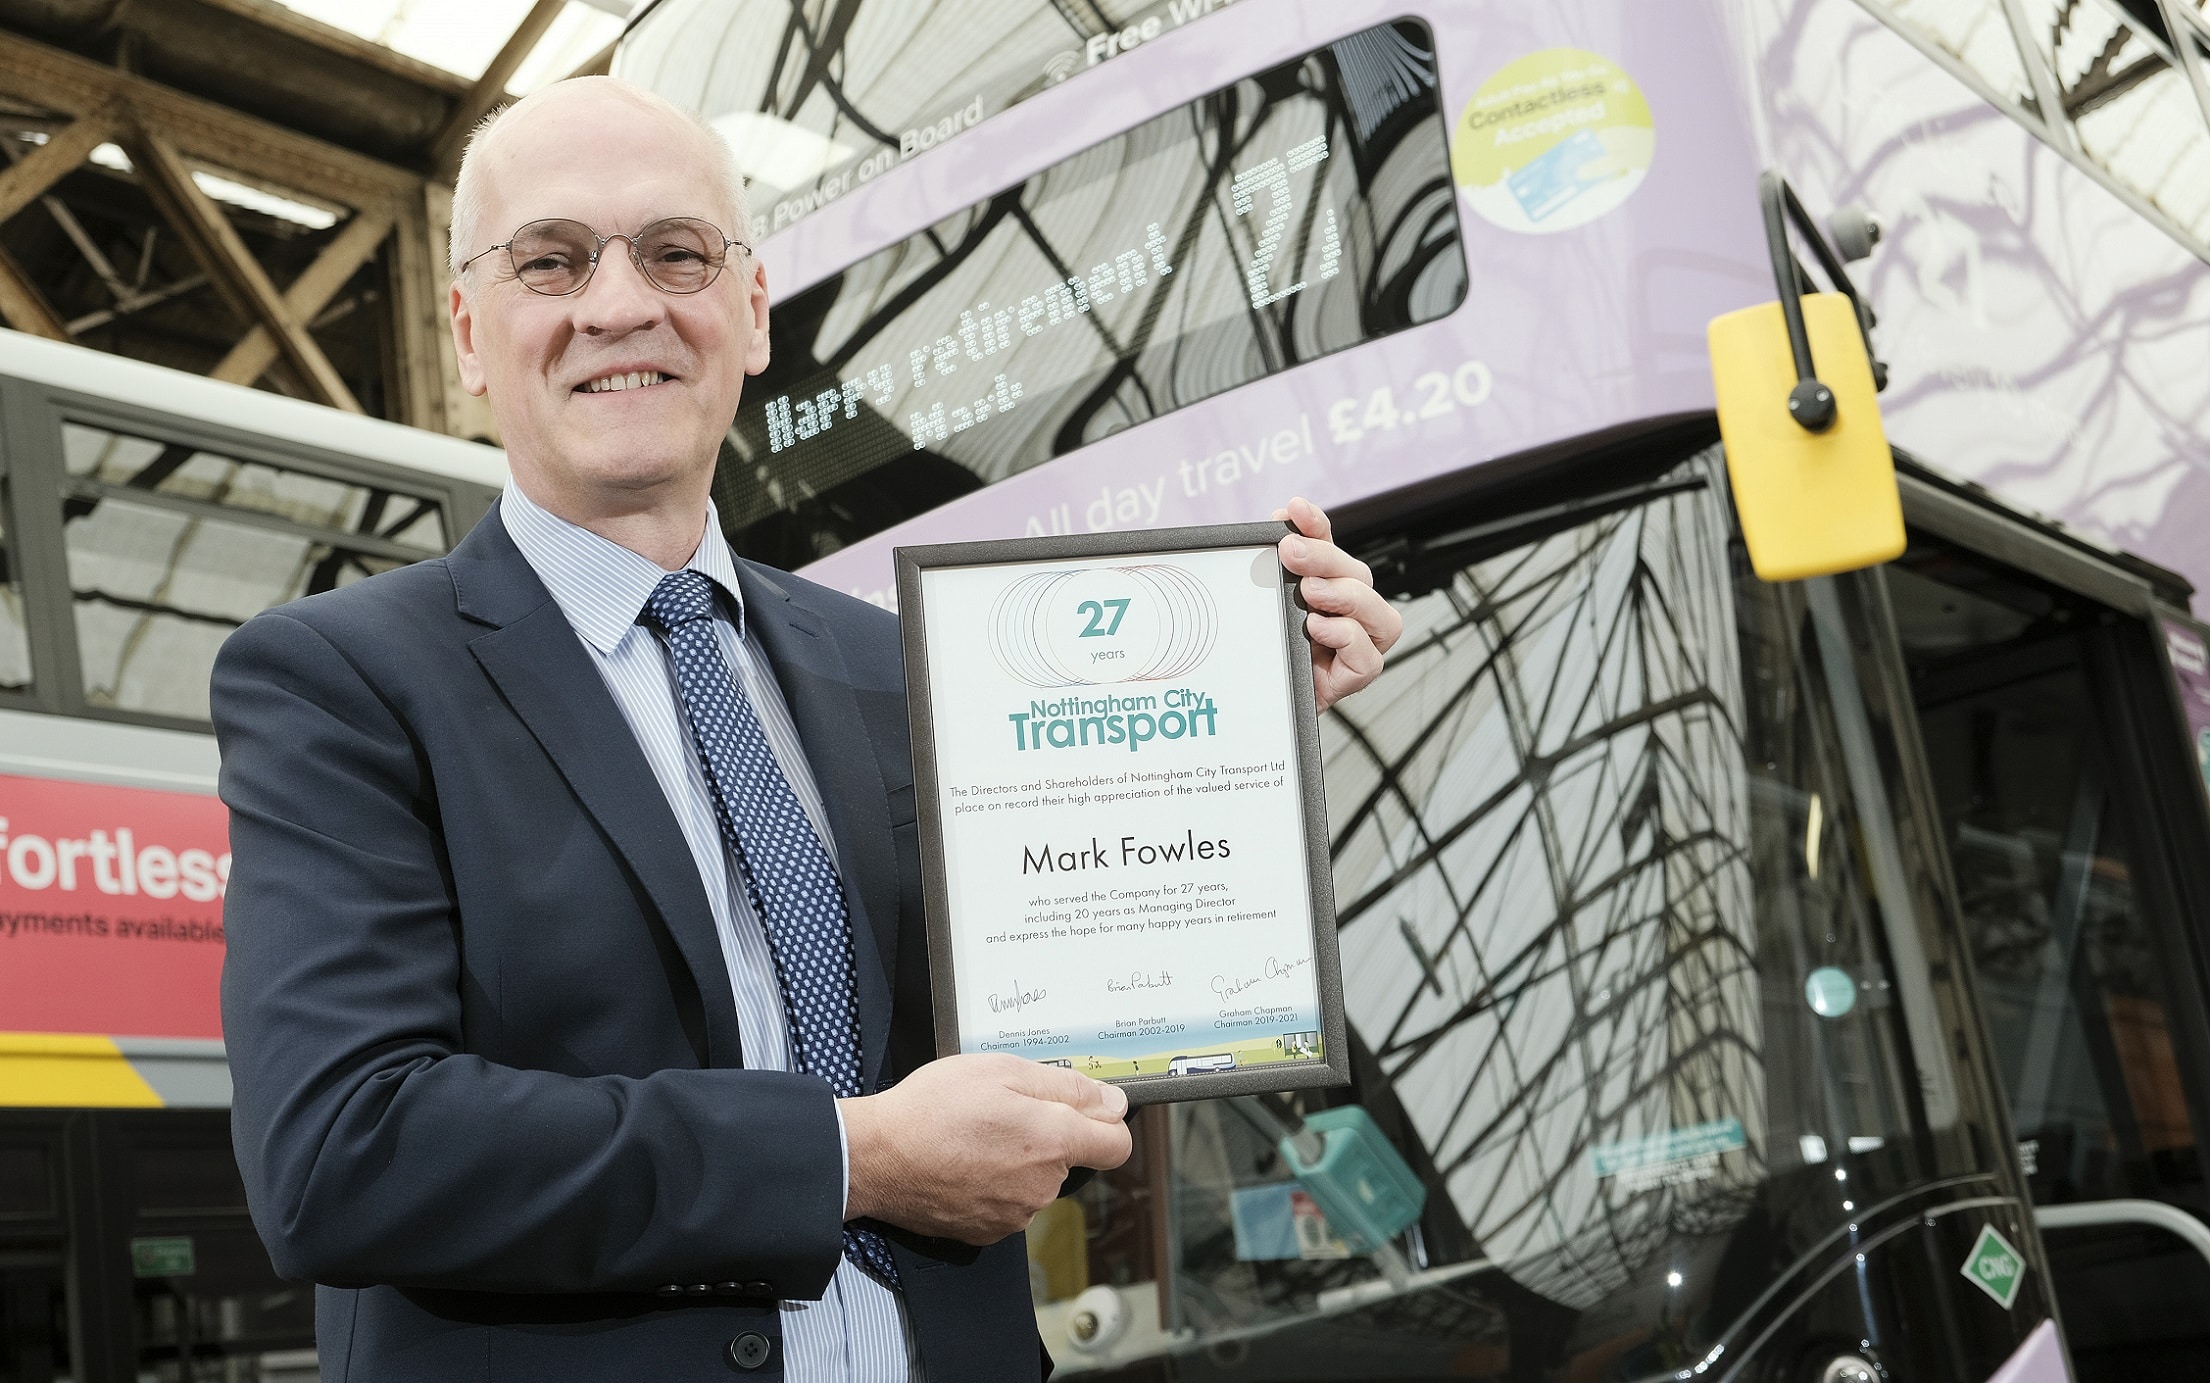 Mark Fowles retires from Nottingham City Tranport after 27 years